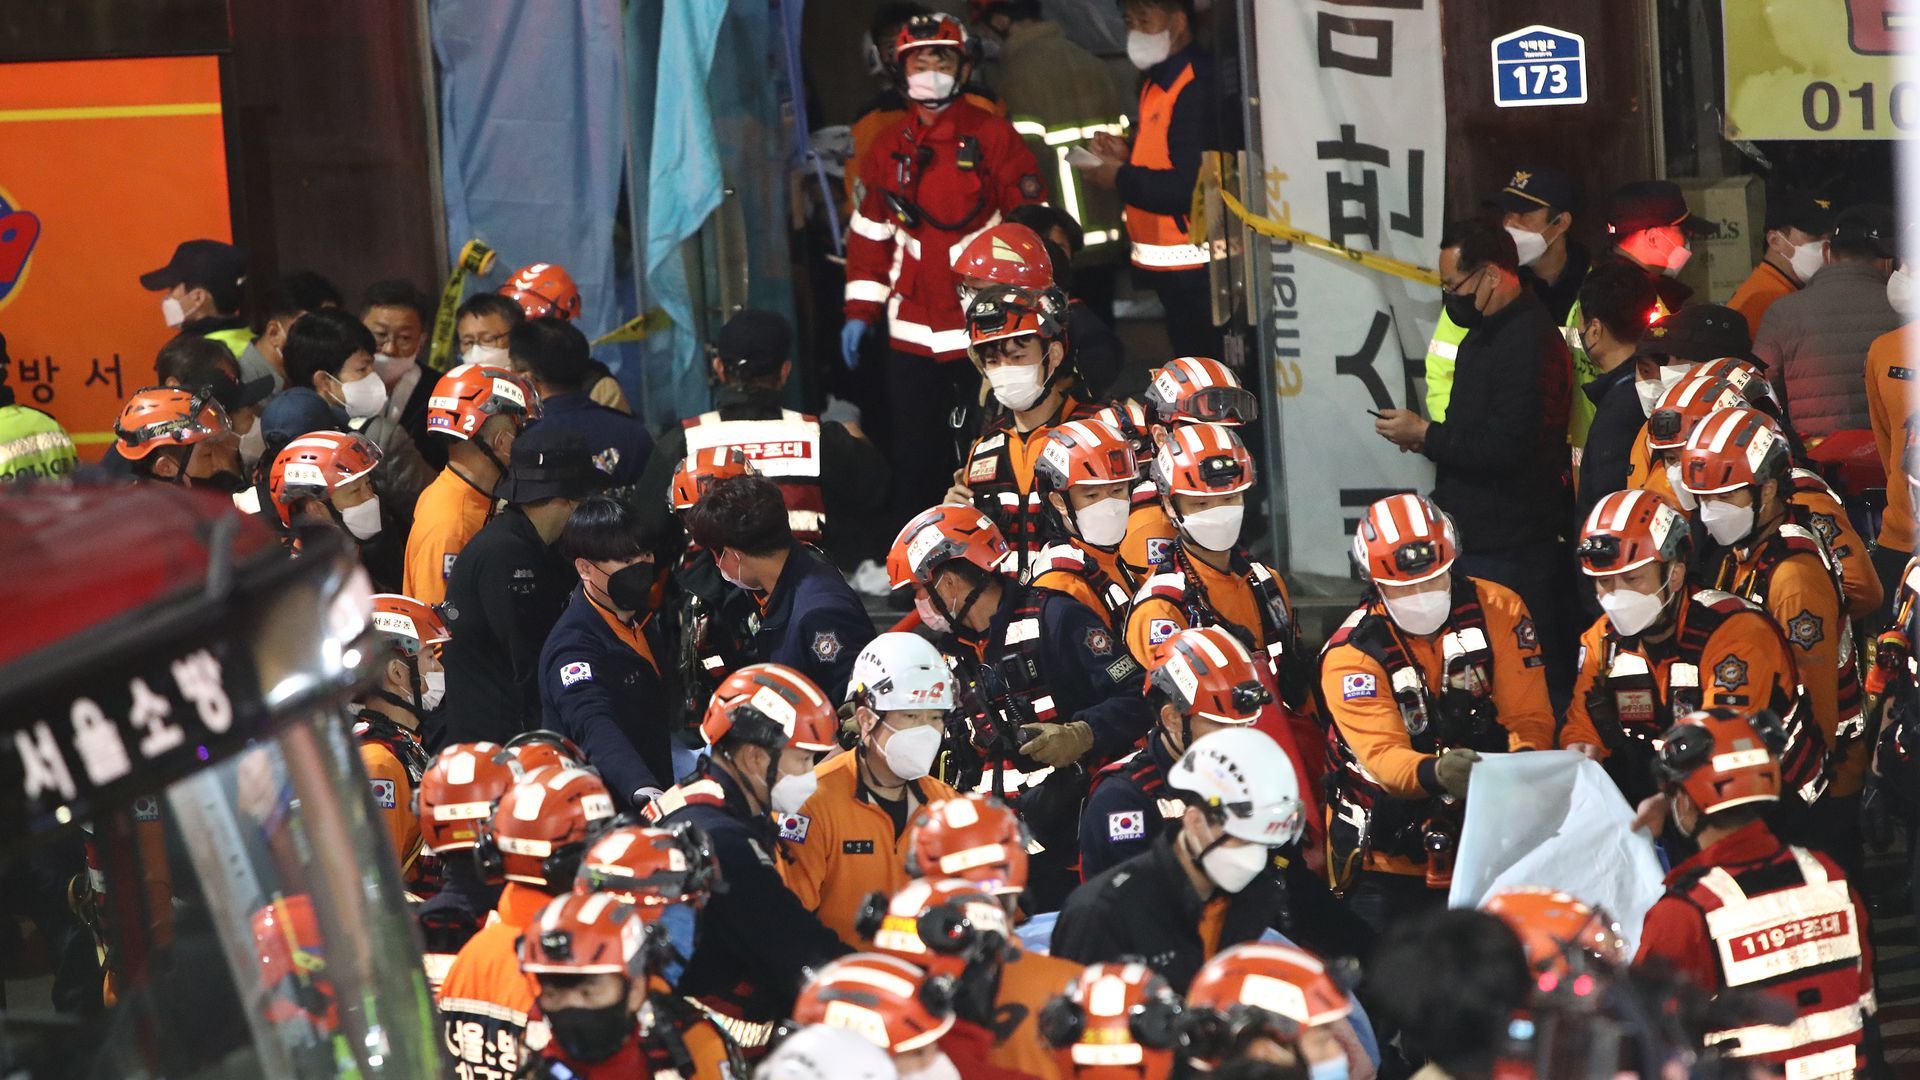 Emergency services treat injured people after a stampede on October 30, 2022 in Seoul, South Korea. Photo: Chung Sung-Jun/Getty Images